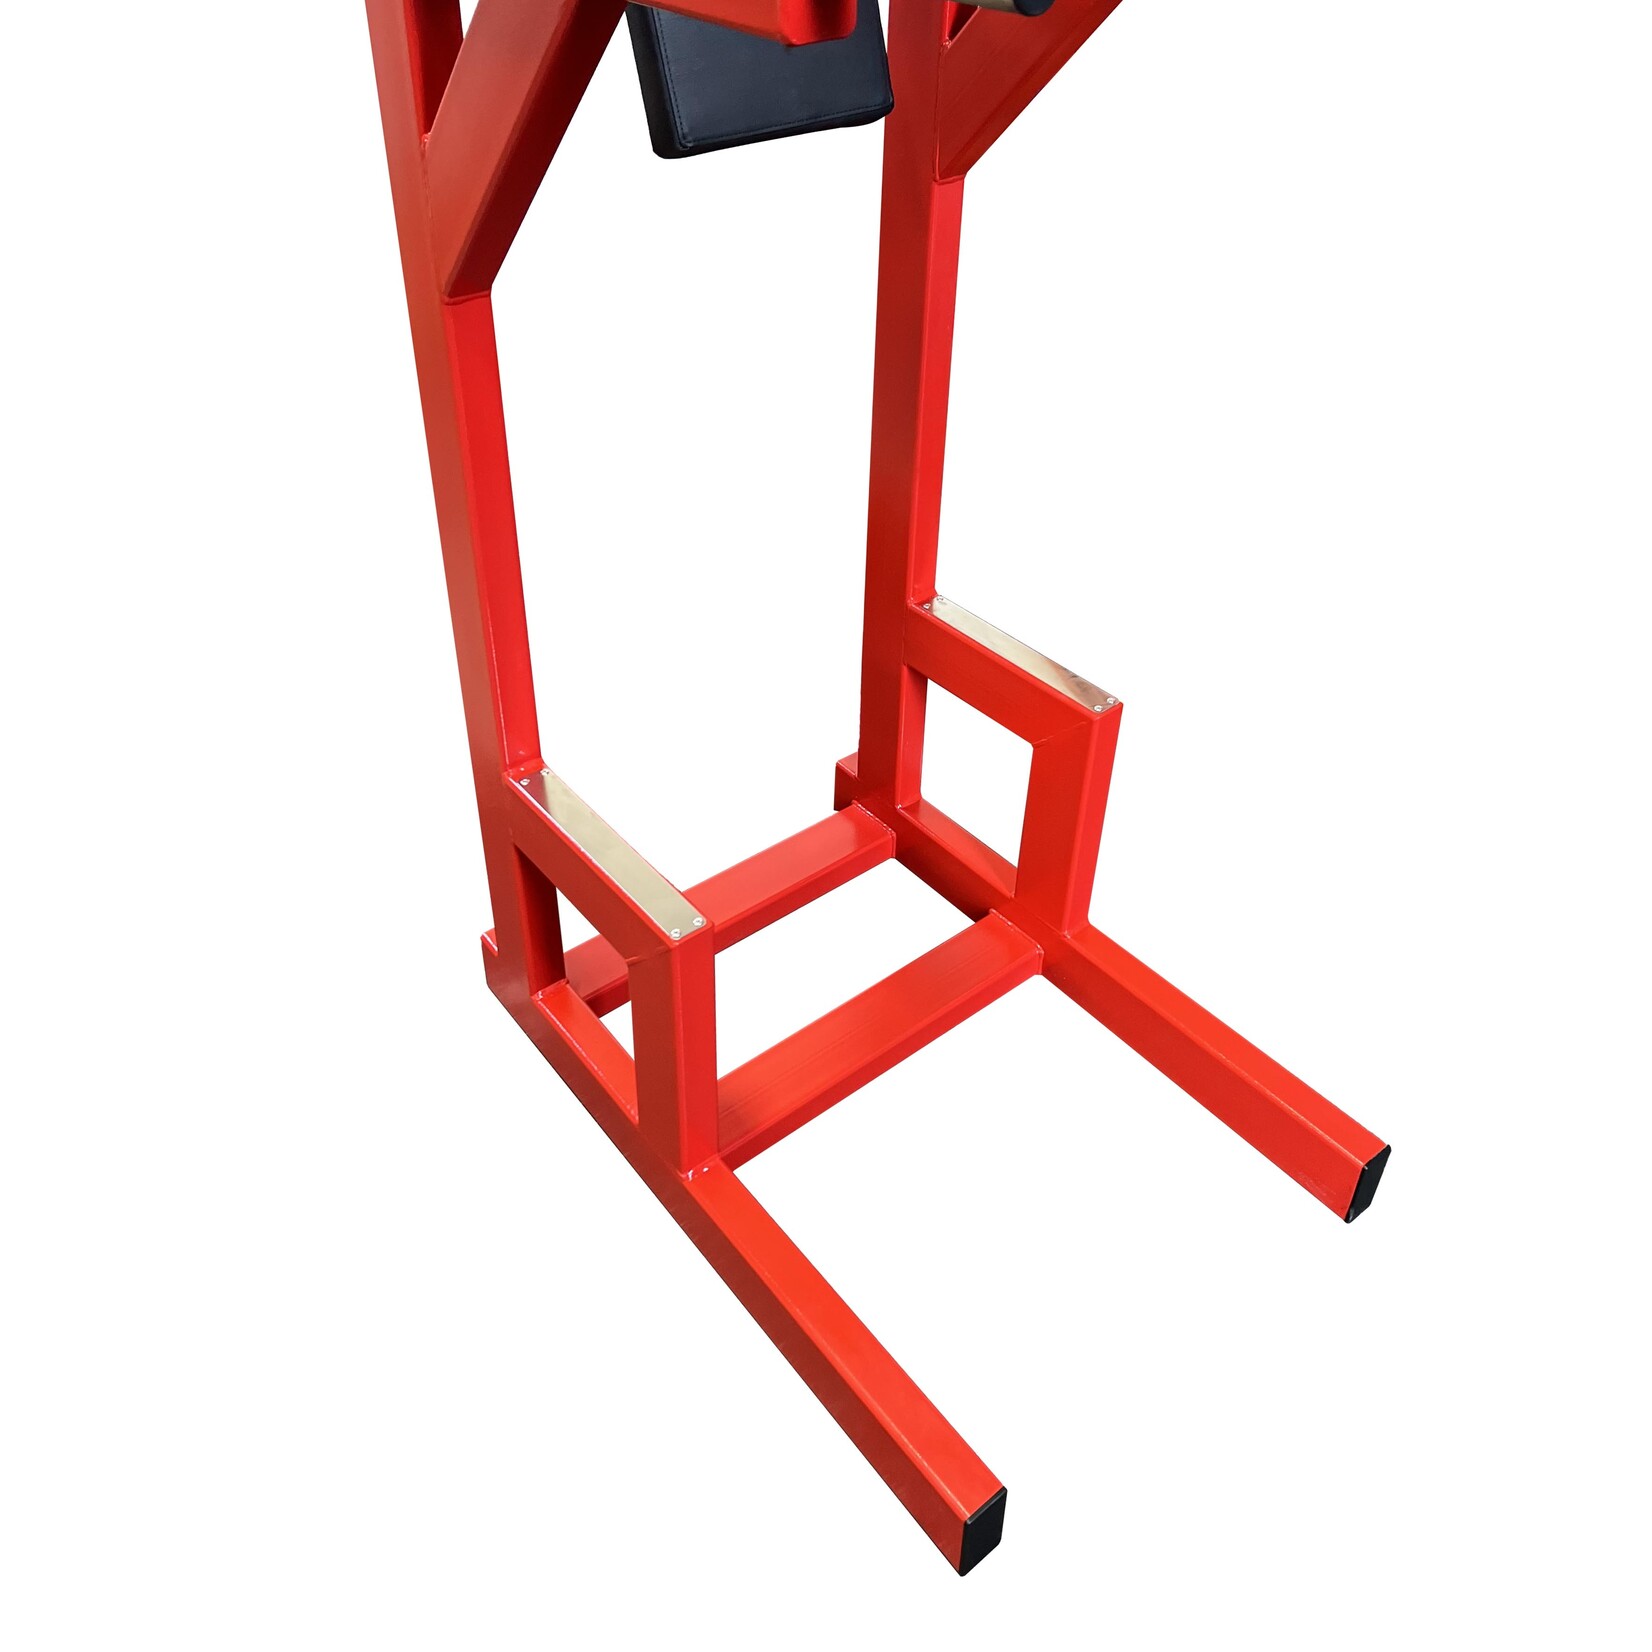 Power Tower (Pull Up/Chin Up/Dips Leg Raise) 3KX  MULTISTATIONS - FITNESS  PRODUCE - Professional Gym Equipment